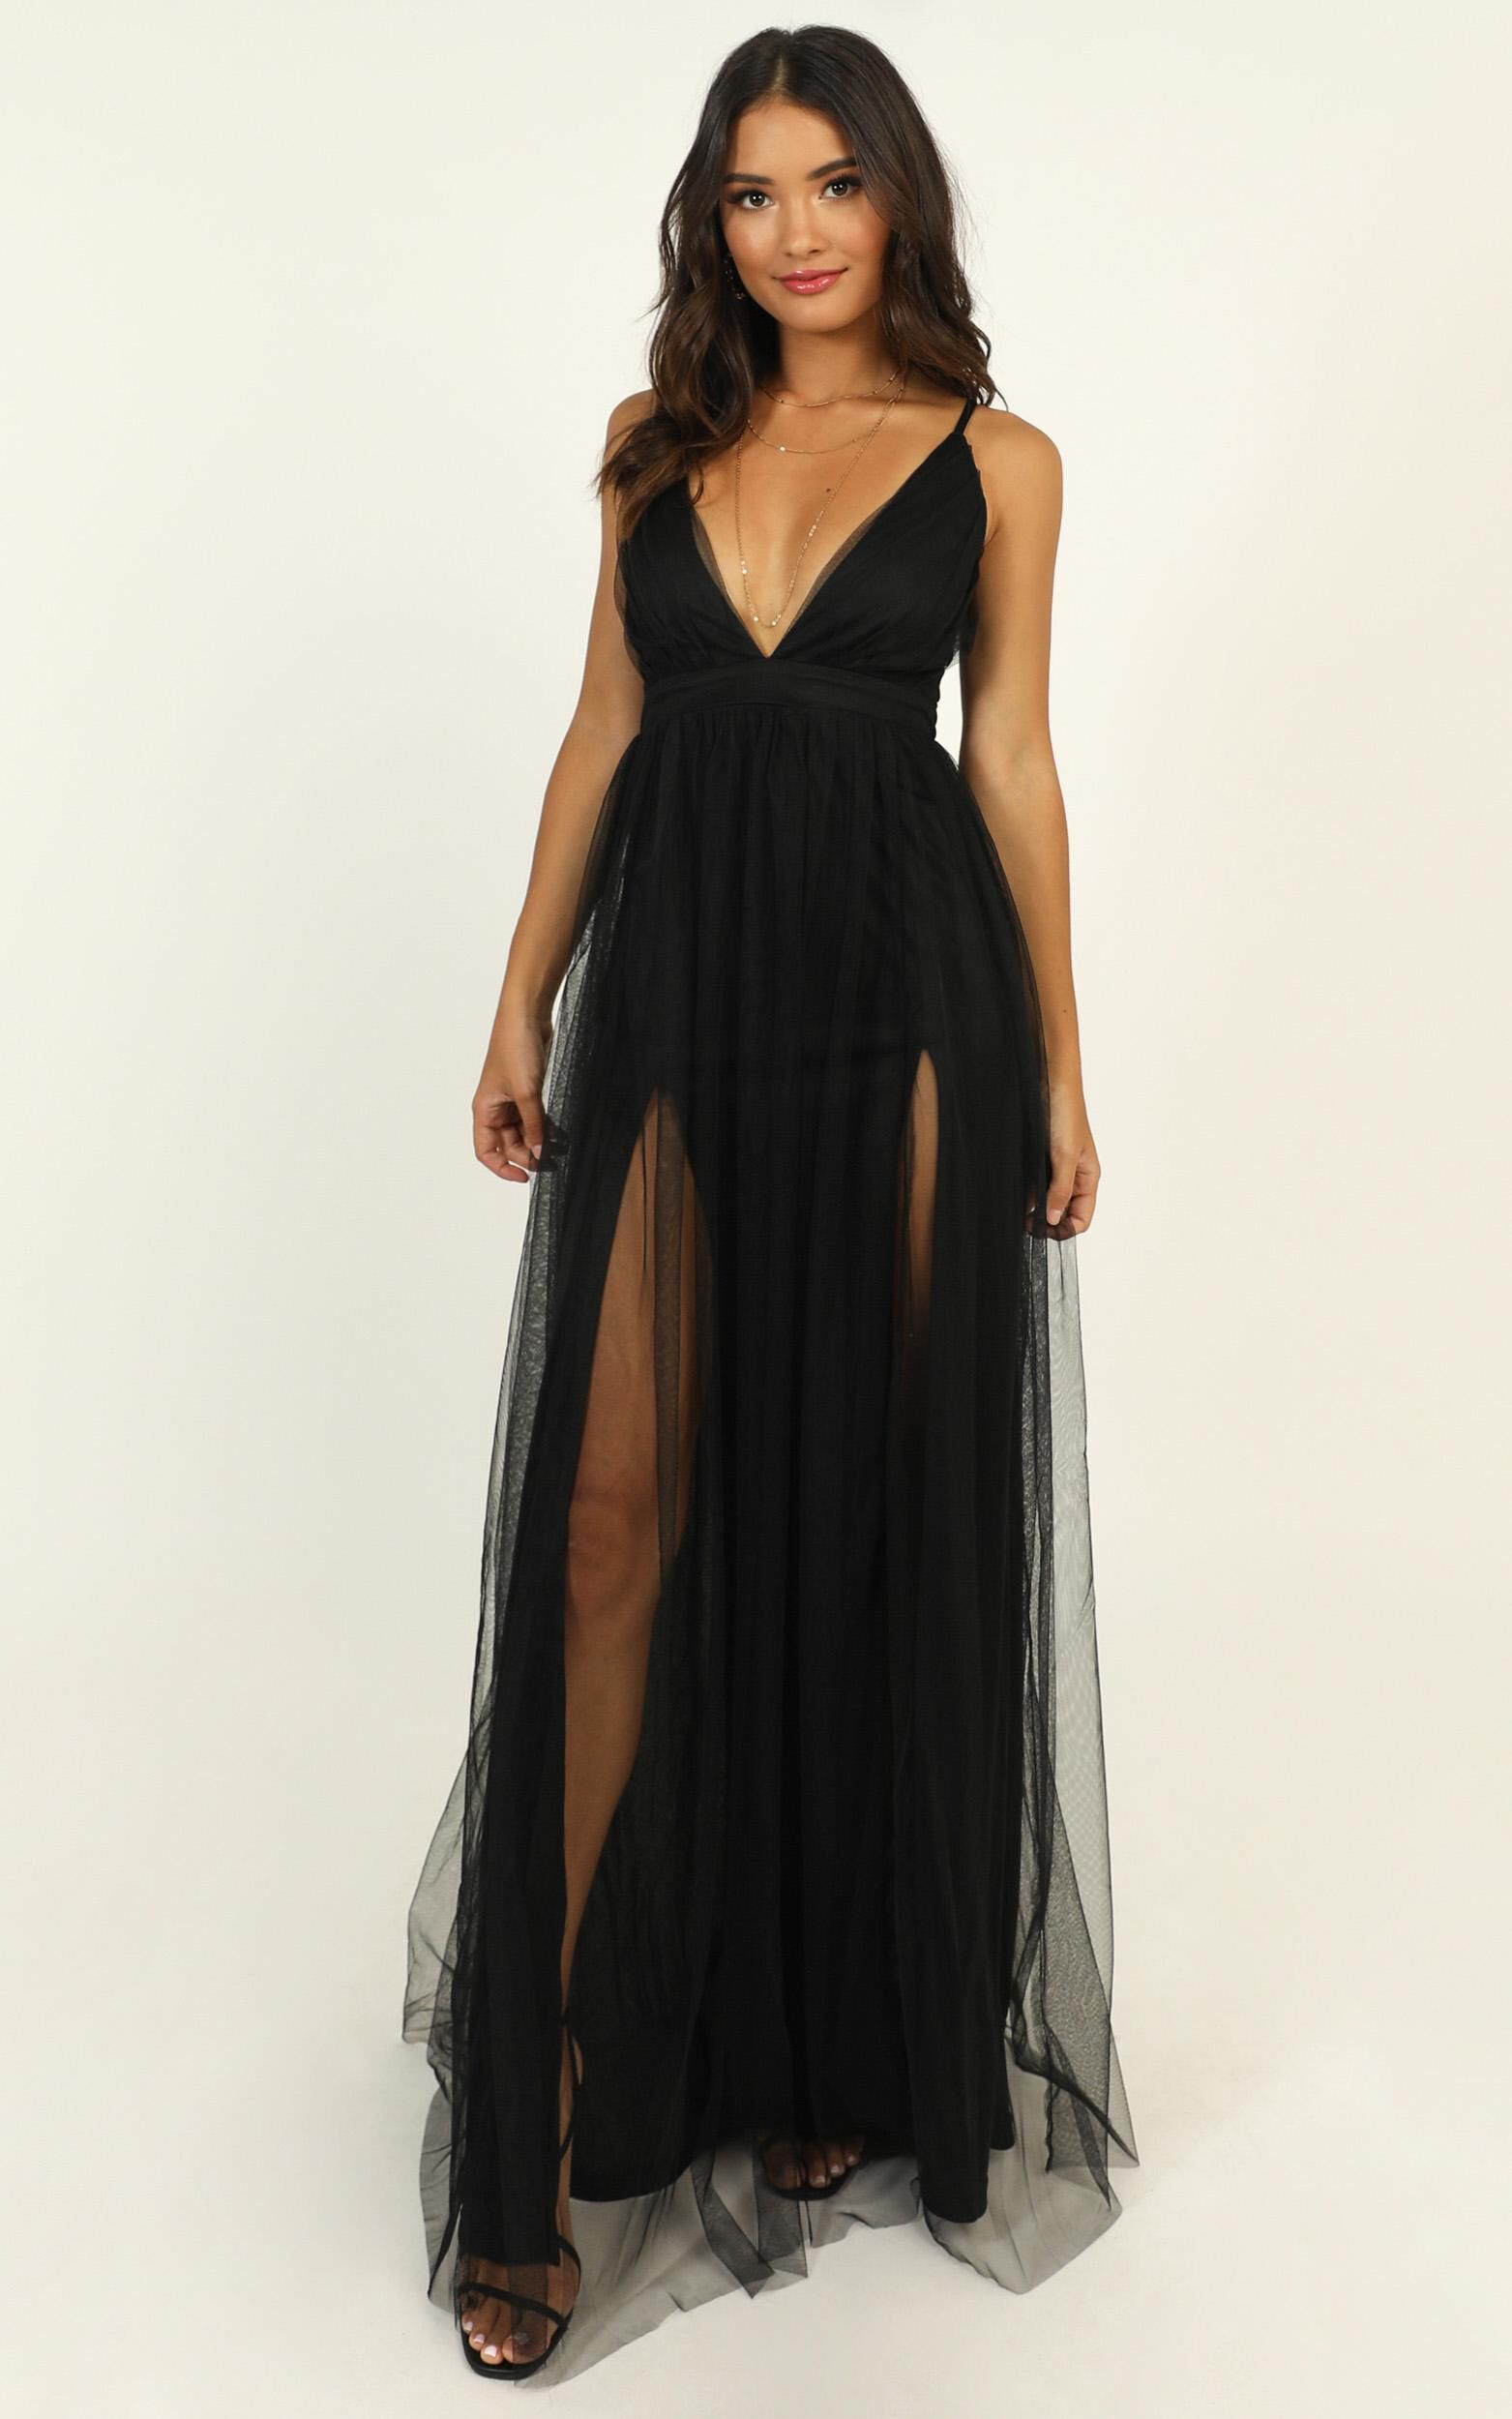 Like A Vision Plunge Maxi Dress in Black Tulle - 04, BLK1